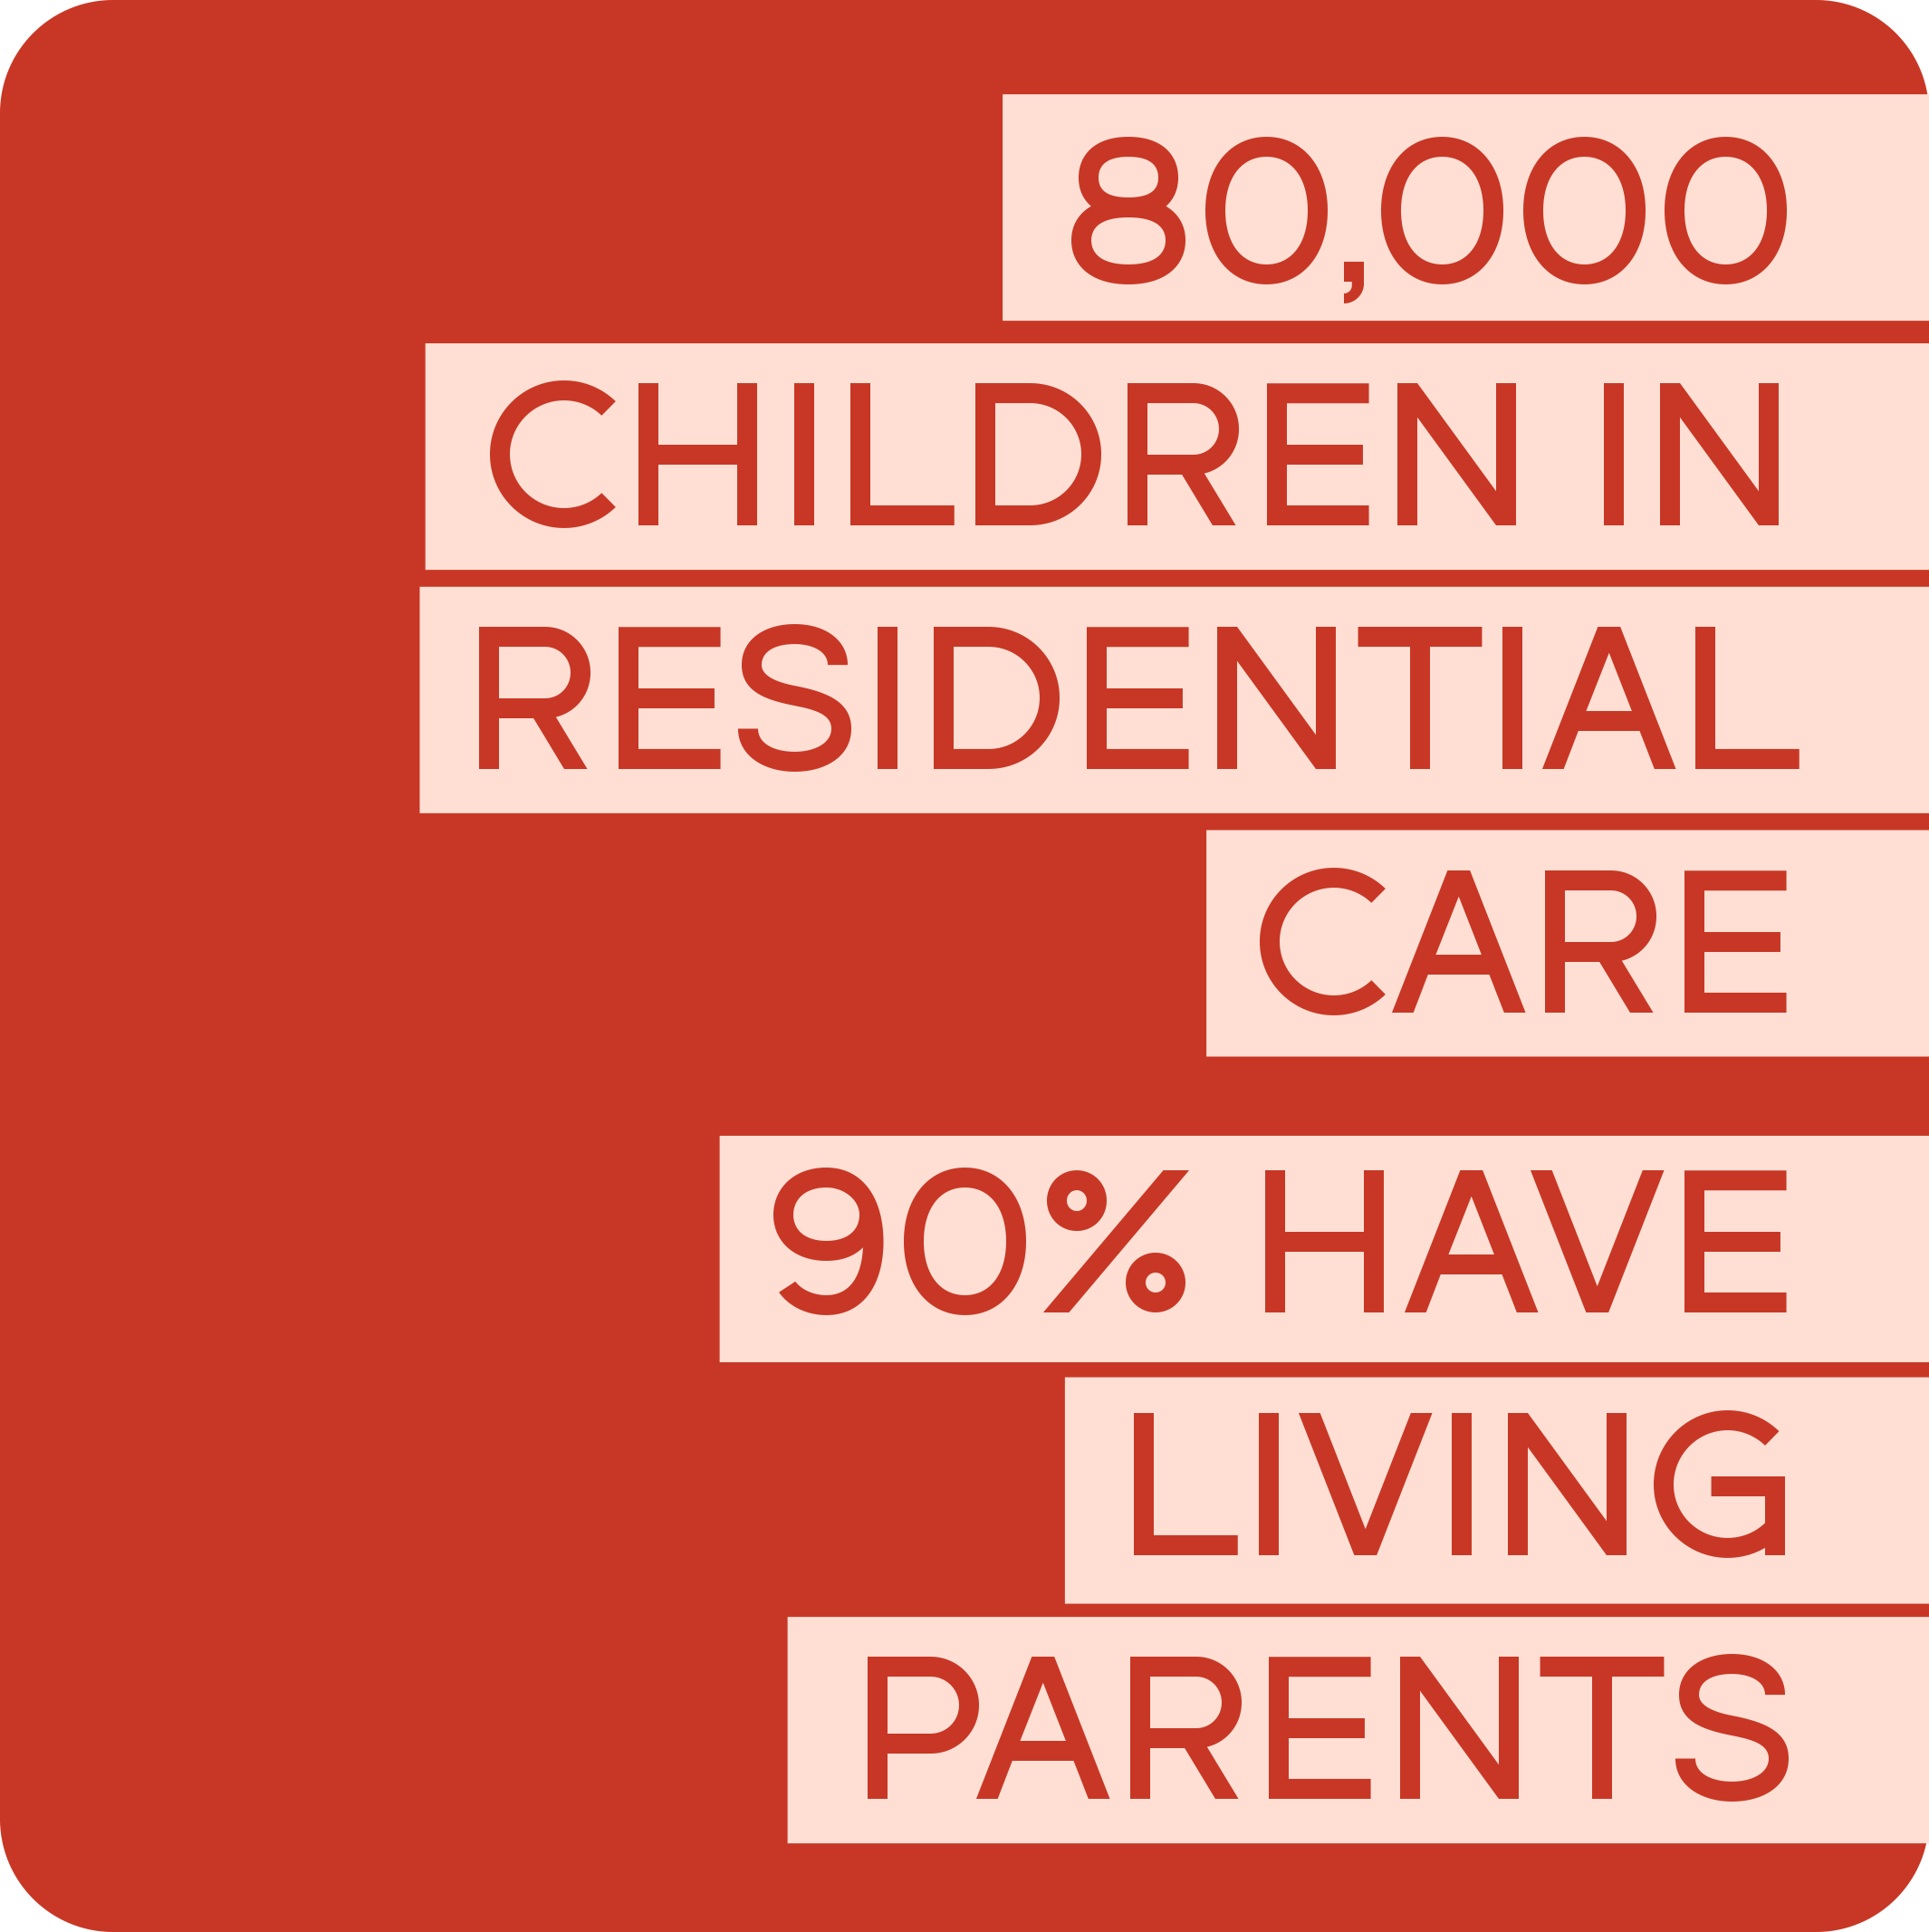 eighty thousand children in residential care